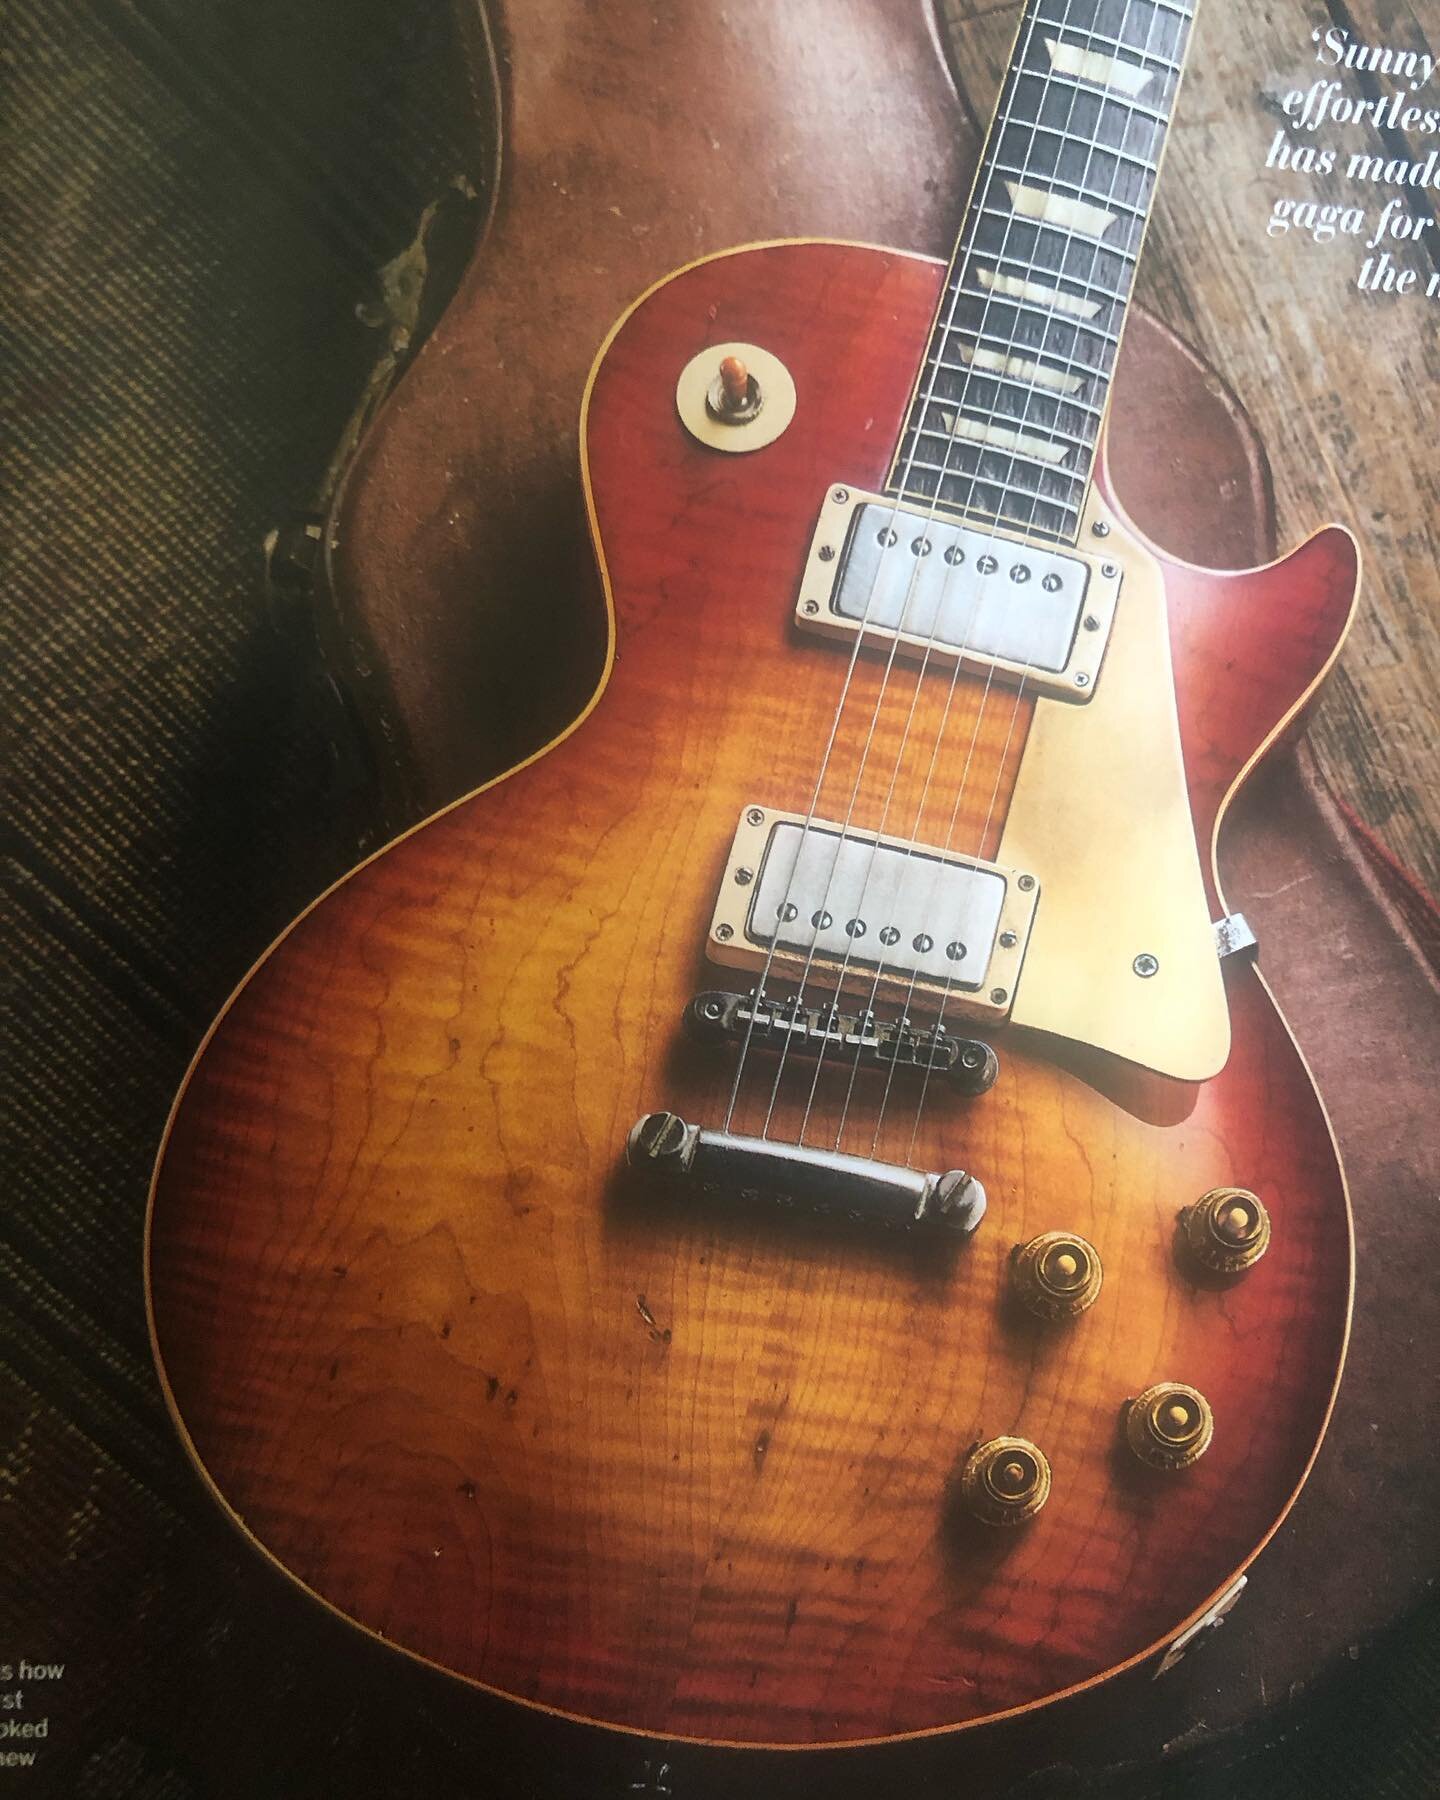 Issue 498 of #guitaristmagazine arrived this morning with a feature on the recently discovered #burst that recently turned up from South Africa. #lespaul #vintagegibson #vintagegibsonguitar #1959lespaul